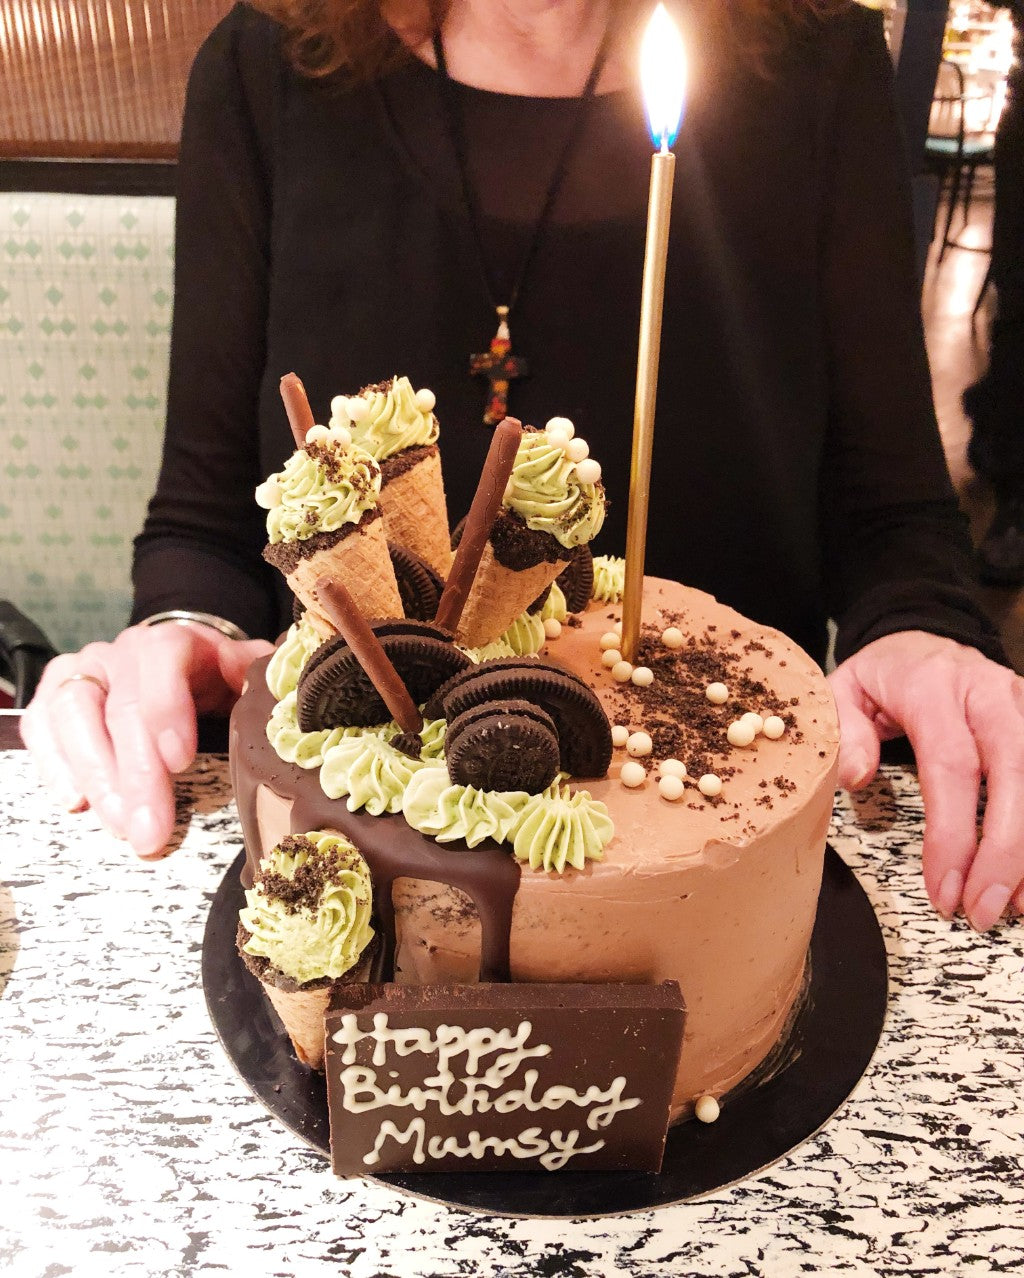 The Mother-in-Law's Mayfair Birthday Cake - Anges de Sucre